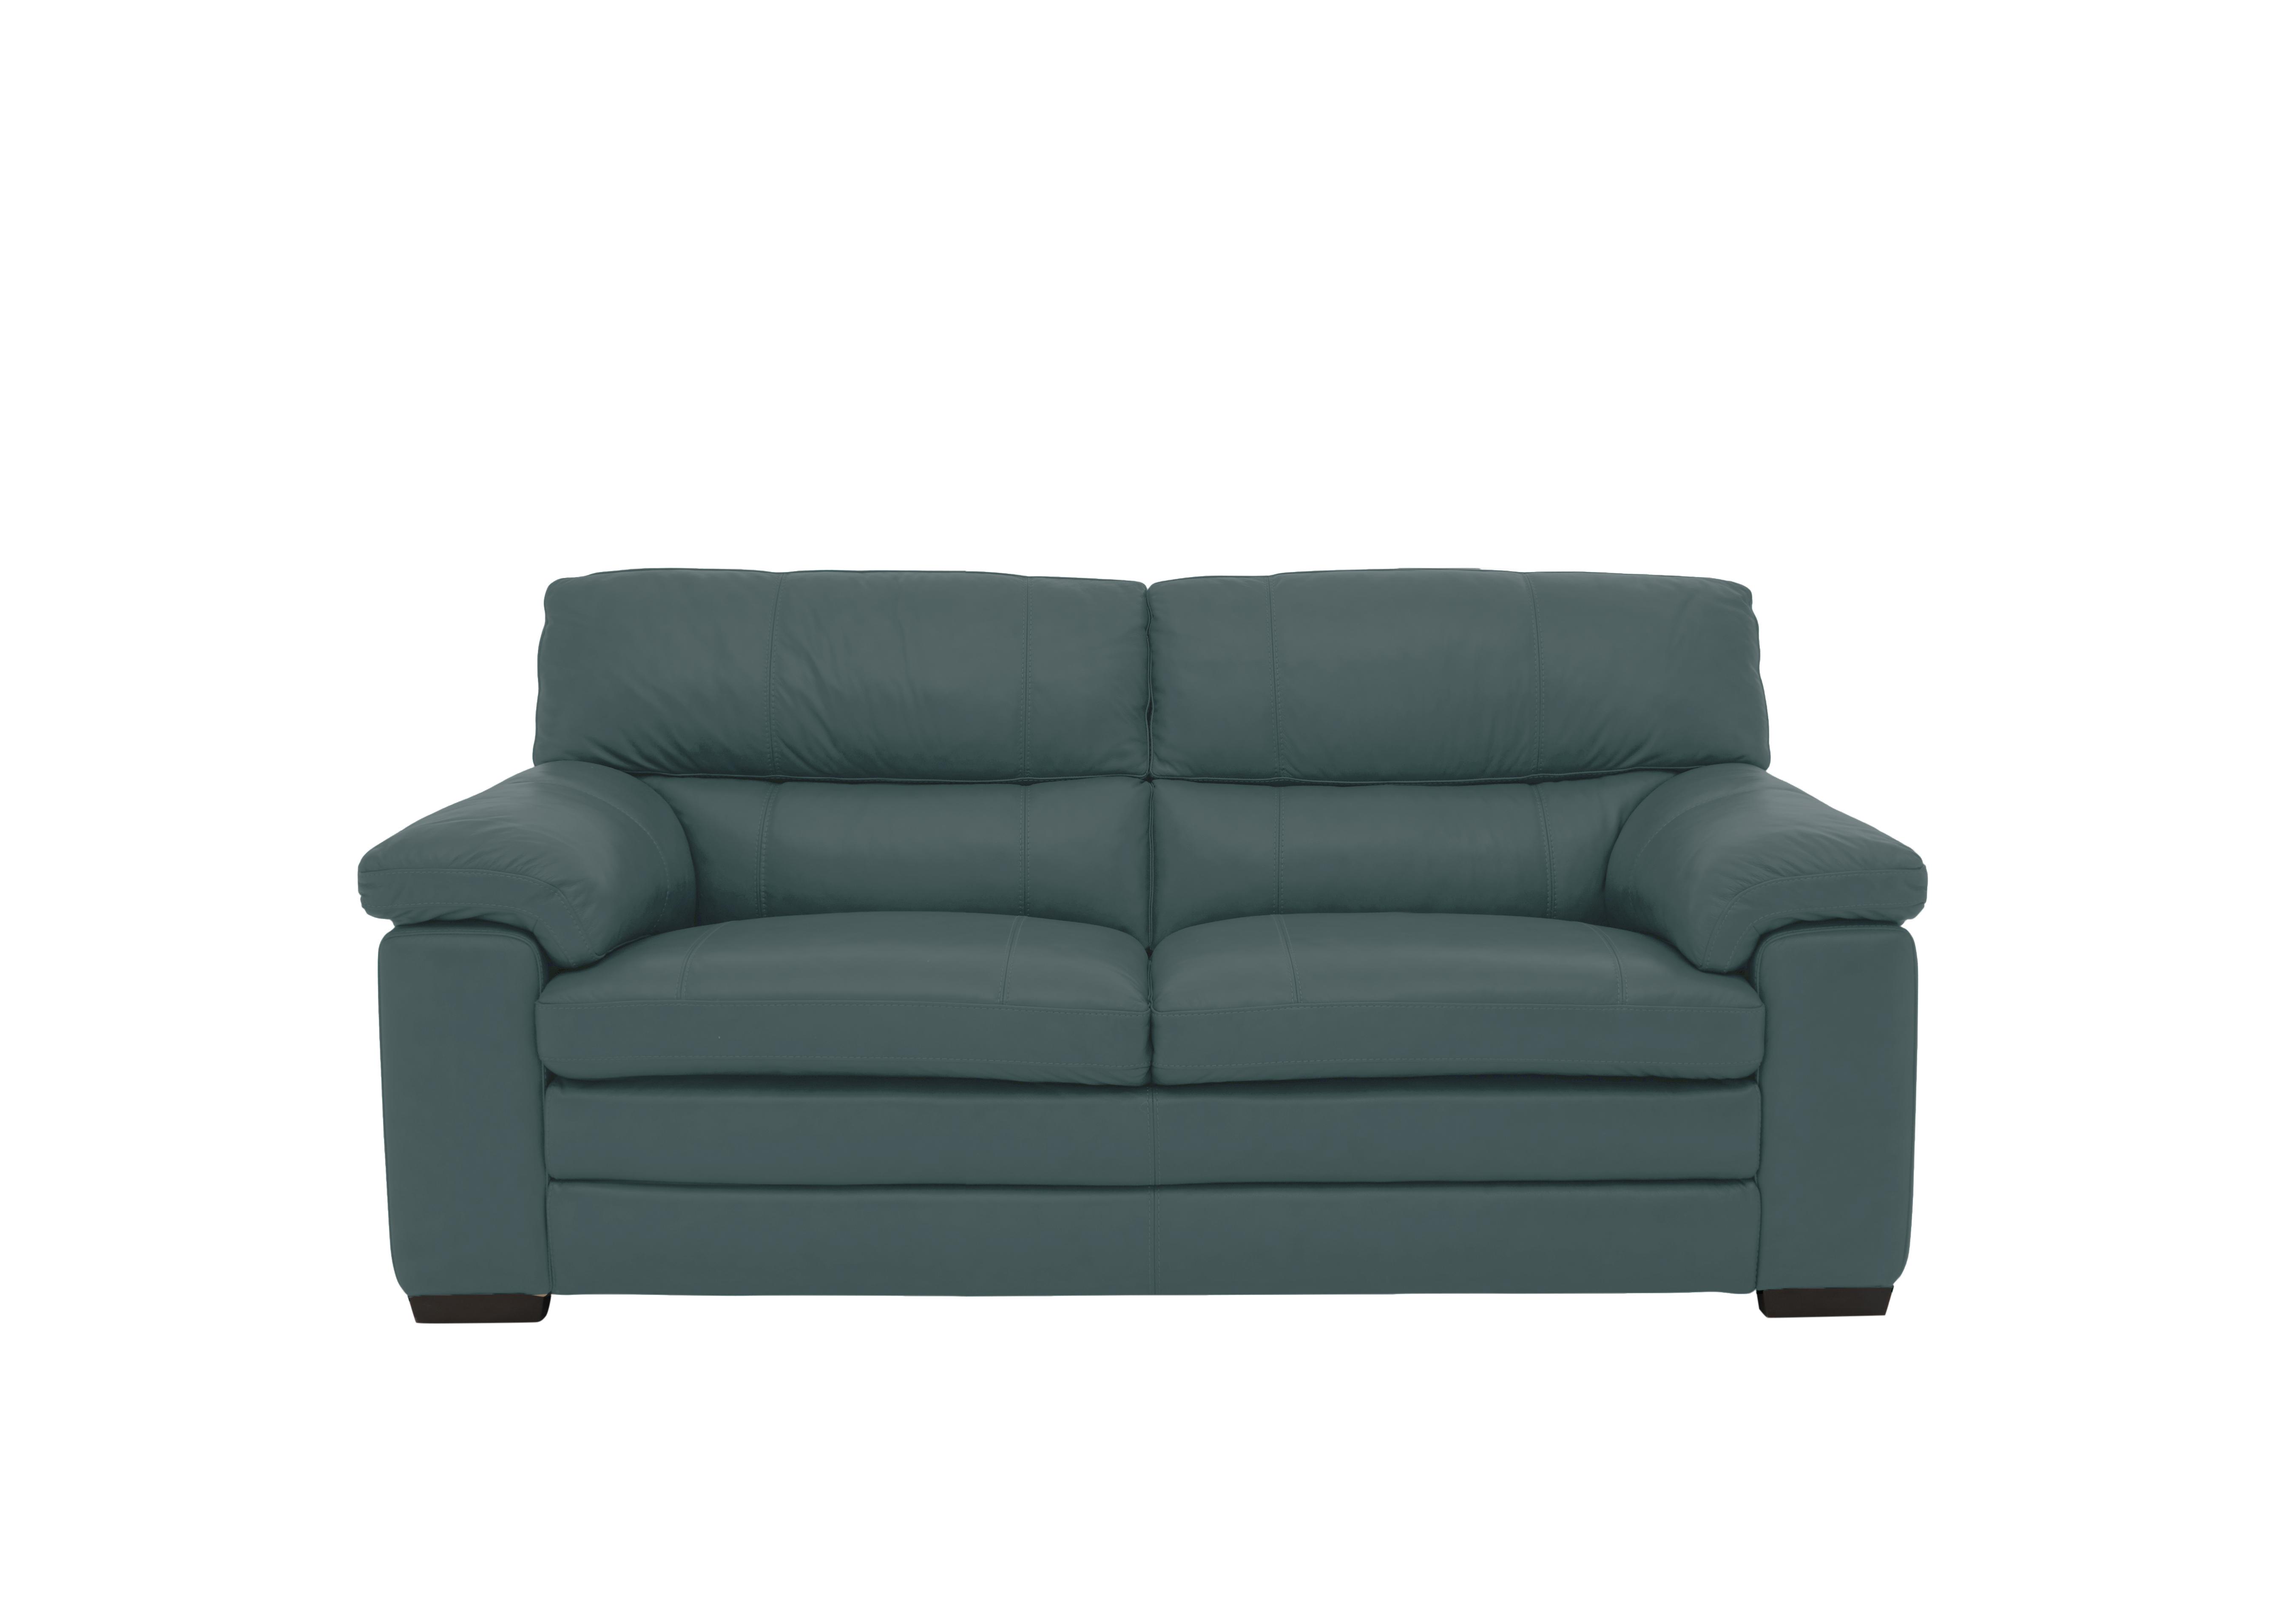 Cozee 2 Seater Pure Premium Leather Sofa in Bv-301e Lake Green on Furniture Village